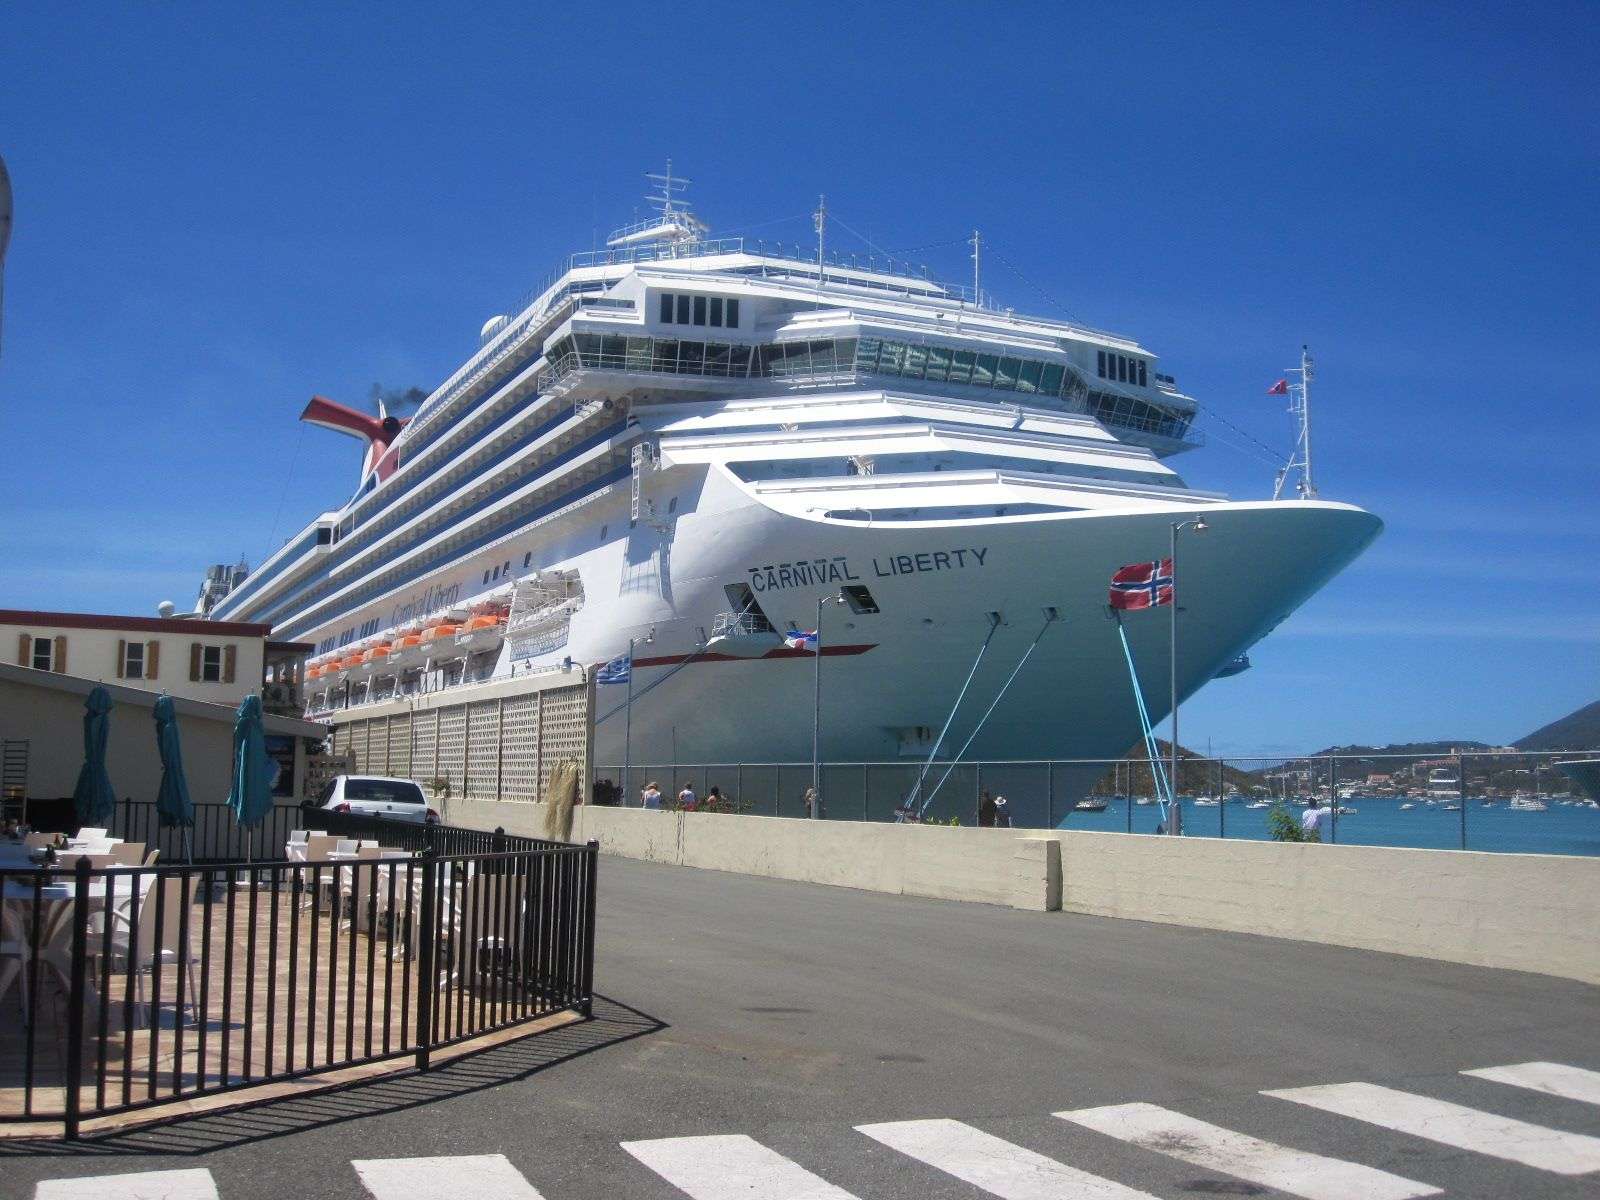 Always wanted to go on a cruise ship to st. thomas ...